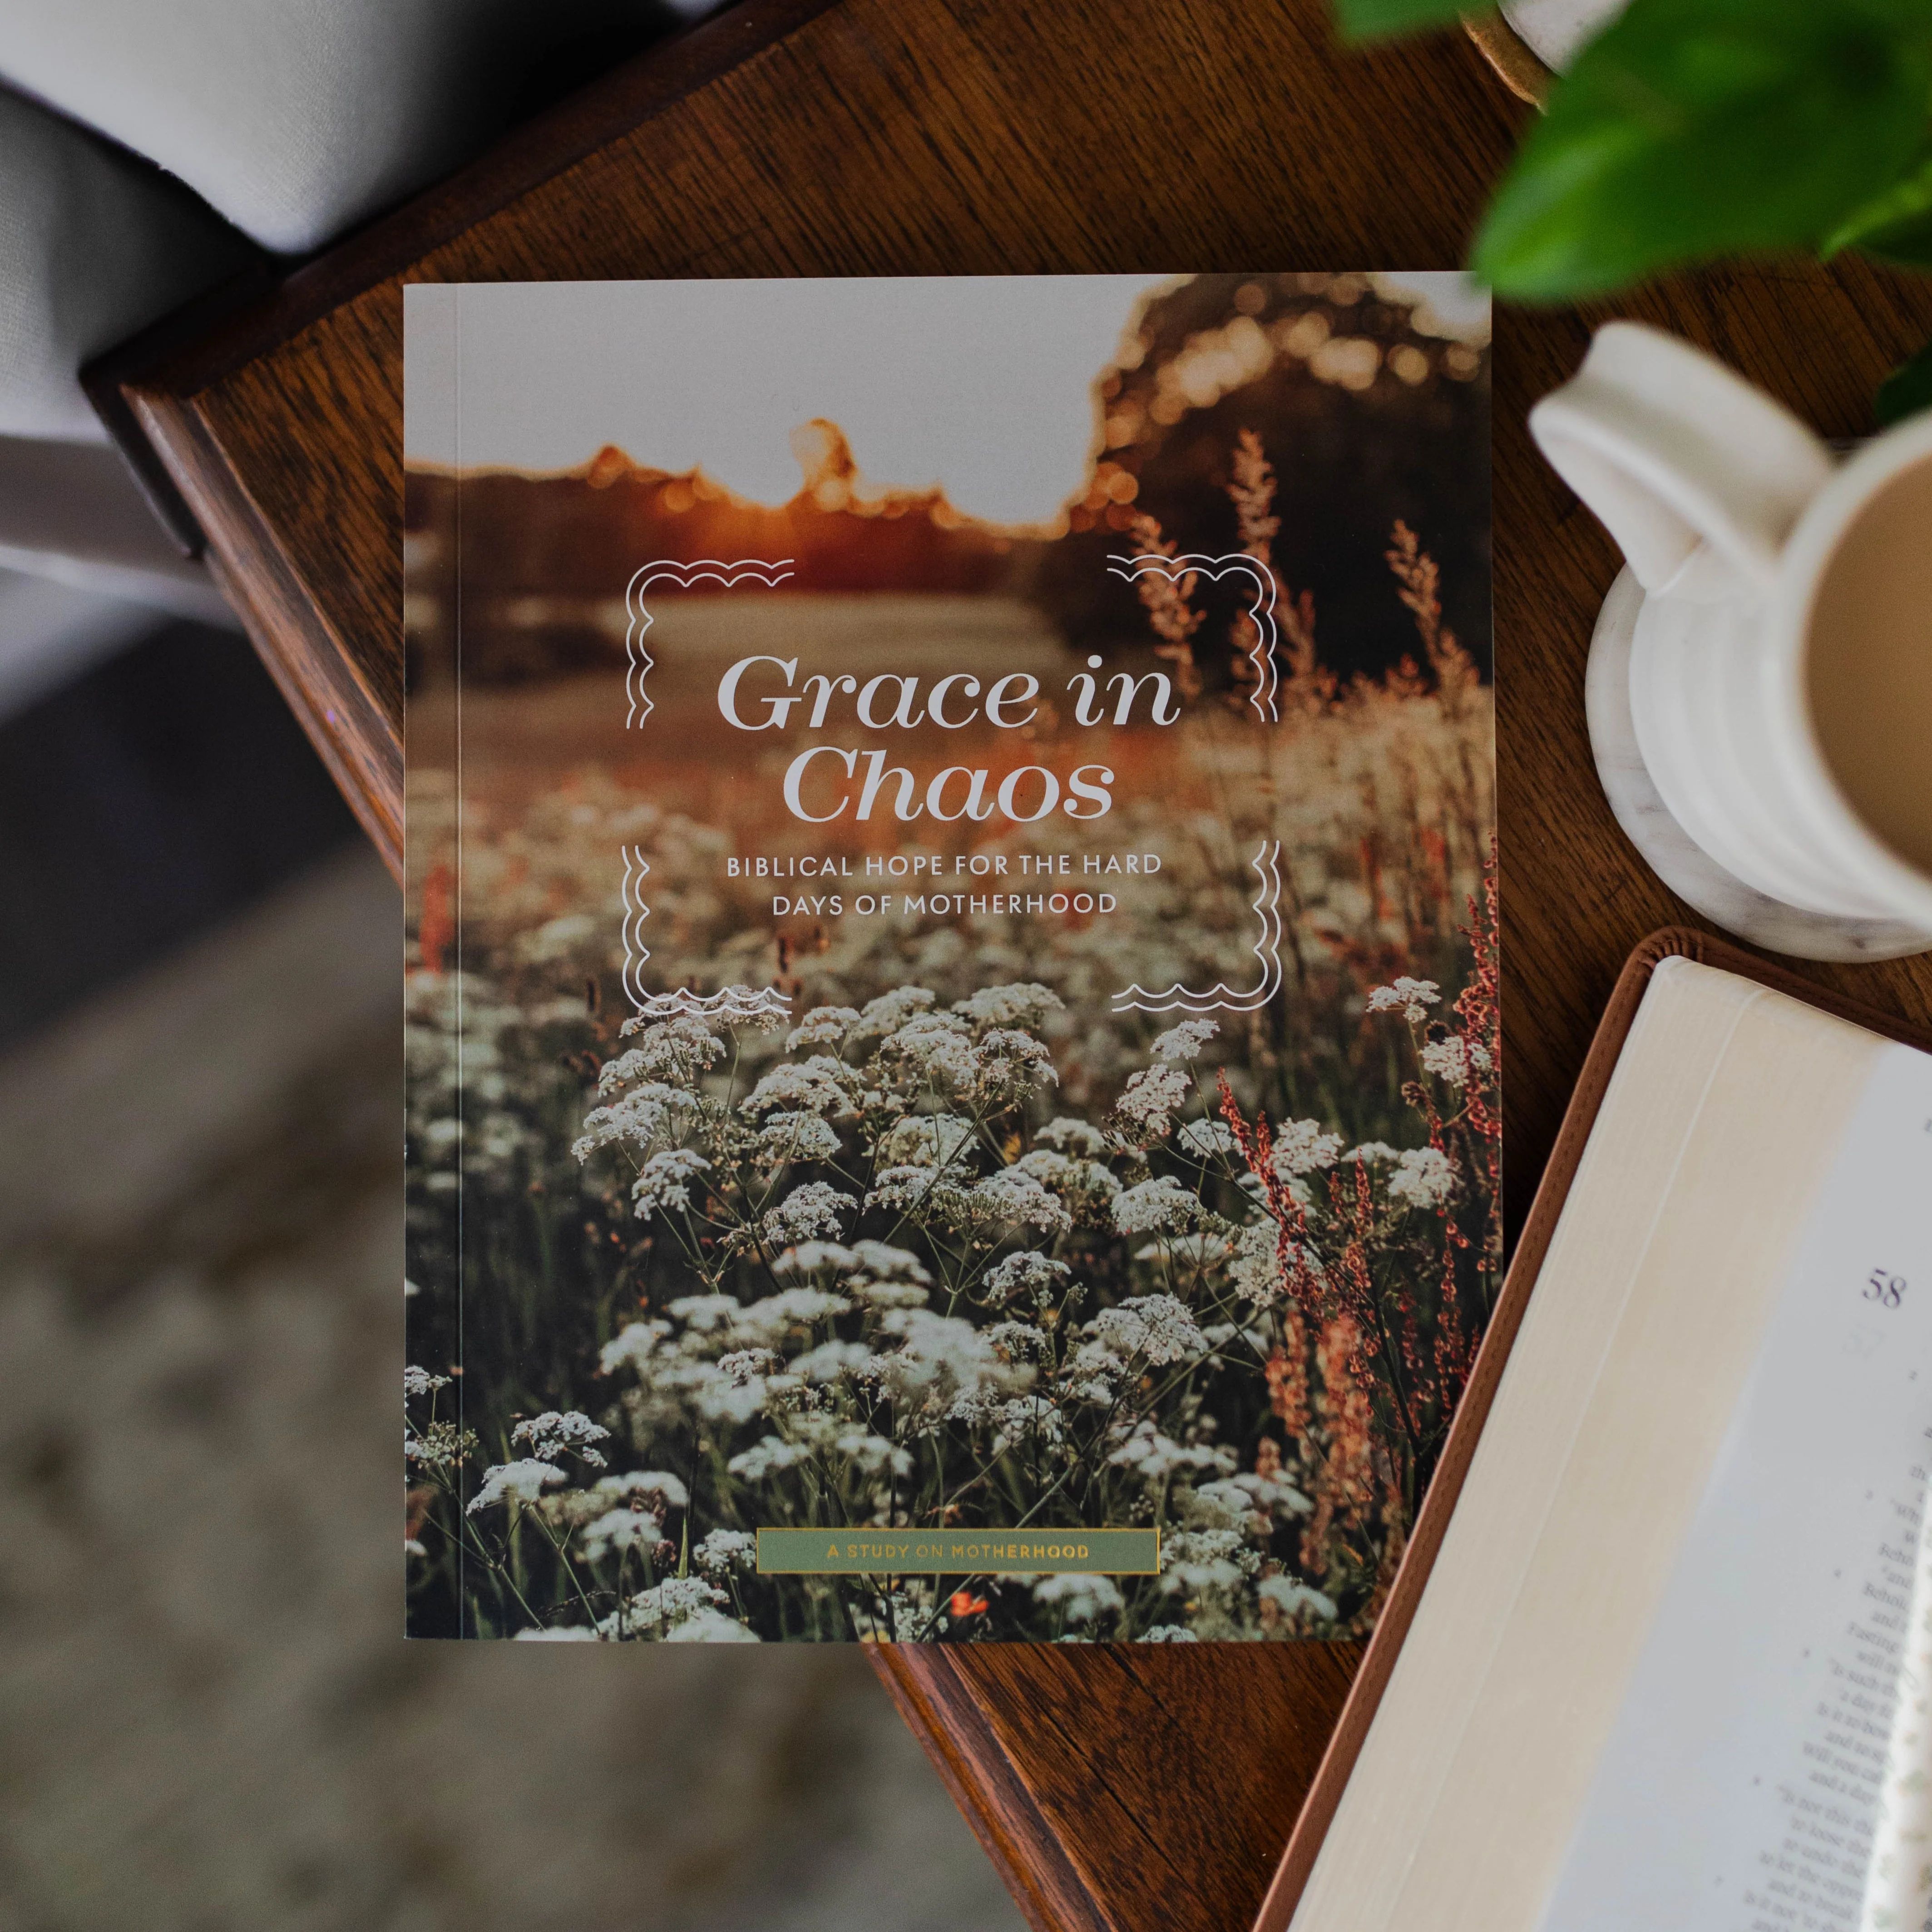 Grace in Chaos | Motherhood Study| The Daily Grace Co. | The Daily Grace Co.